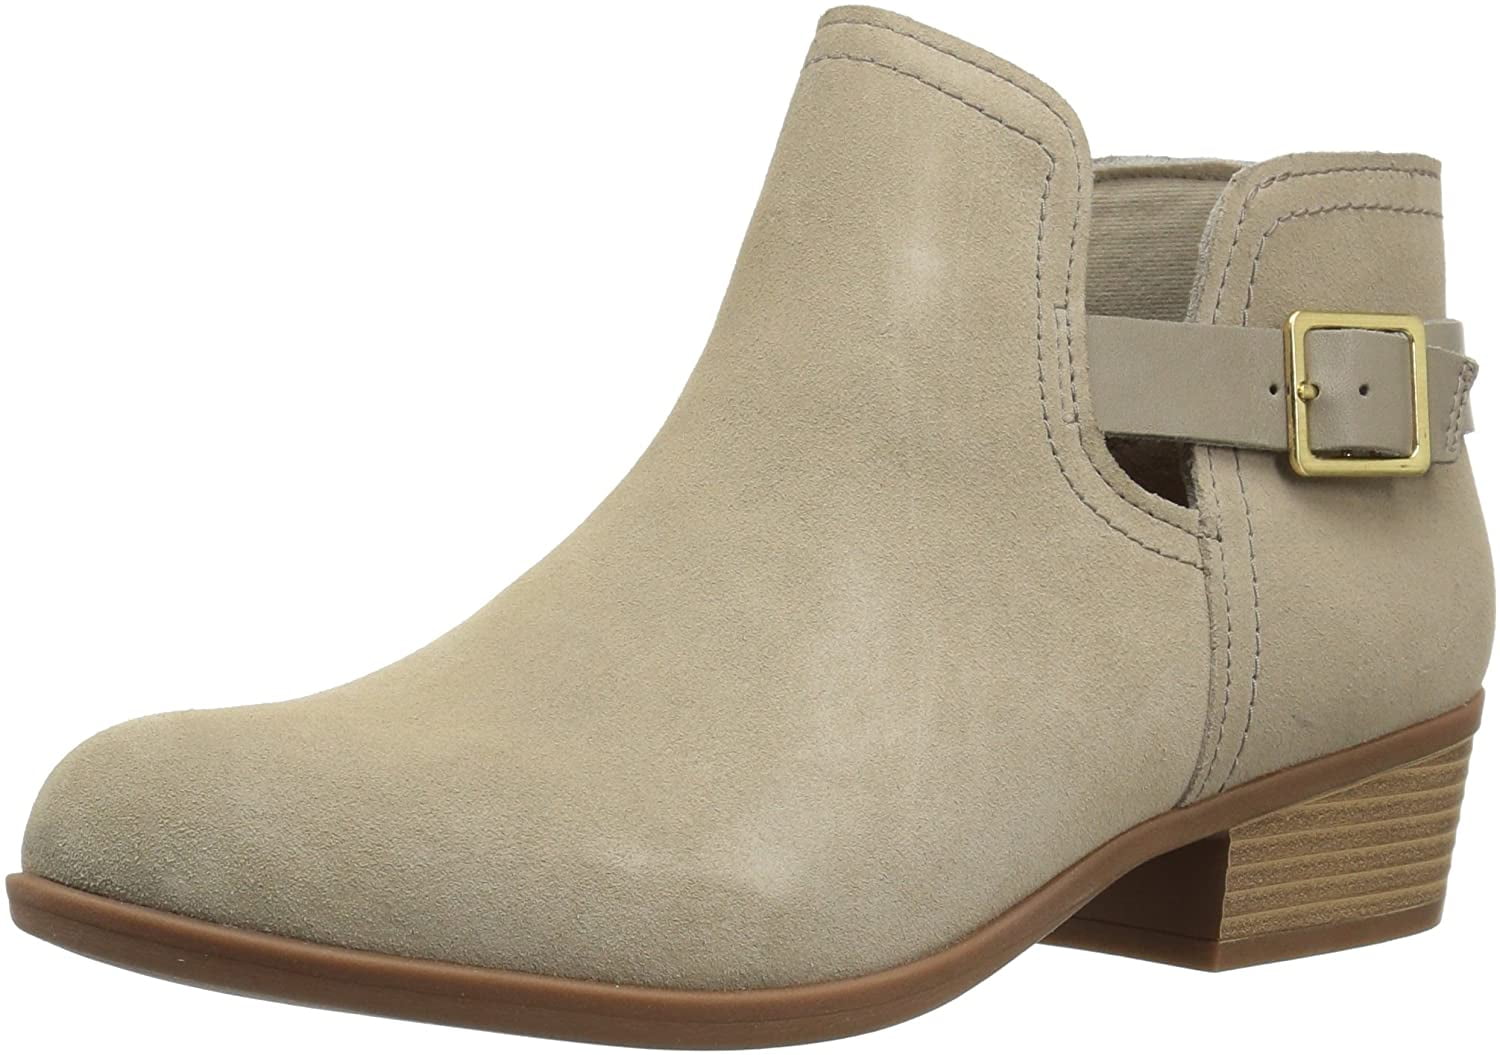 clarks women's addiy carisa ankle boot